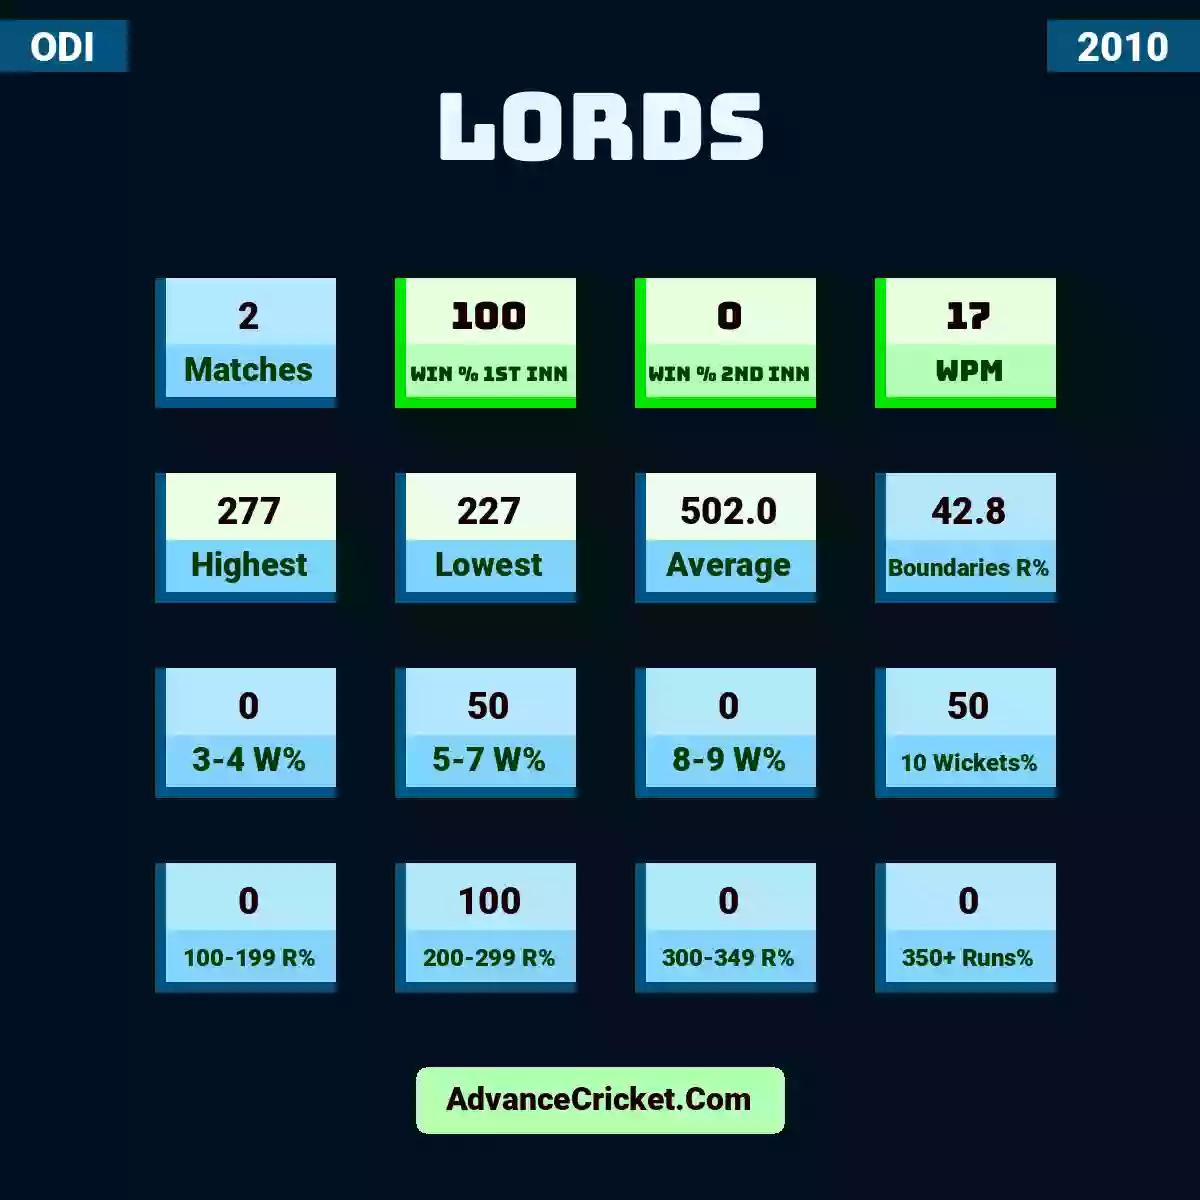 Image showing Lords with Matches: 2, Win % 1st Inn: 100, Win % 2nd Inn: 0, WPM: 17, Highest: 277, Lowest: 227, Average: 502.0, Boundaries R%: 42.8, 3-4 W%: 0, 5-7 W%: 50, 8-9 W%: 0, 10 Wickets%: 50, 100-199 R%: 0, 200-299 R%: 100, 300-349 R%: 0, 350+ Runs%: 0.